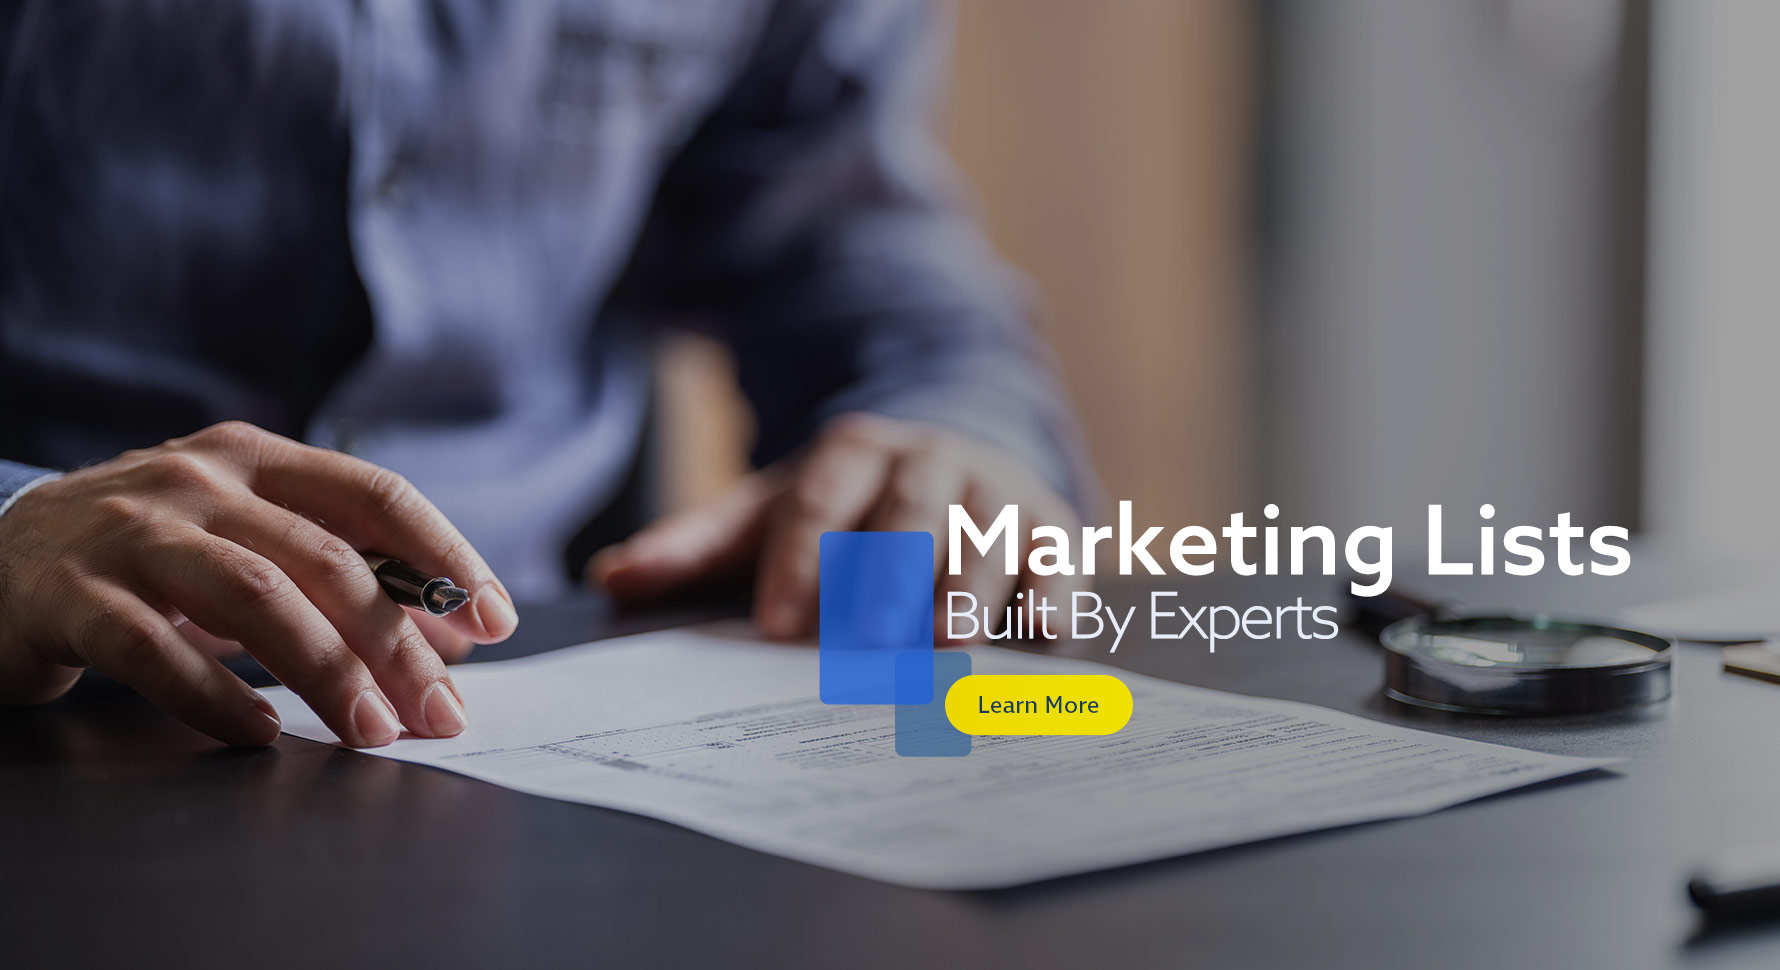 Marketing lists built by experts. Learn More